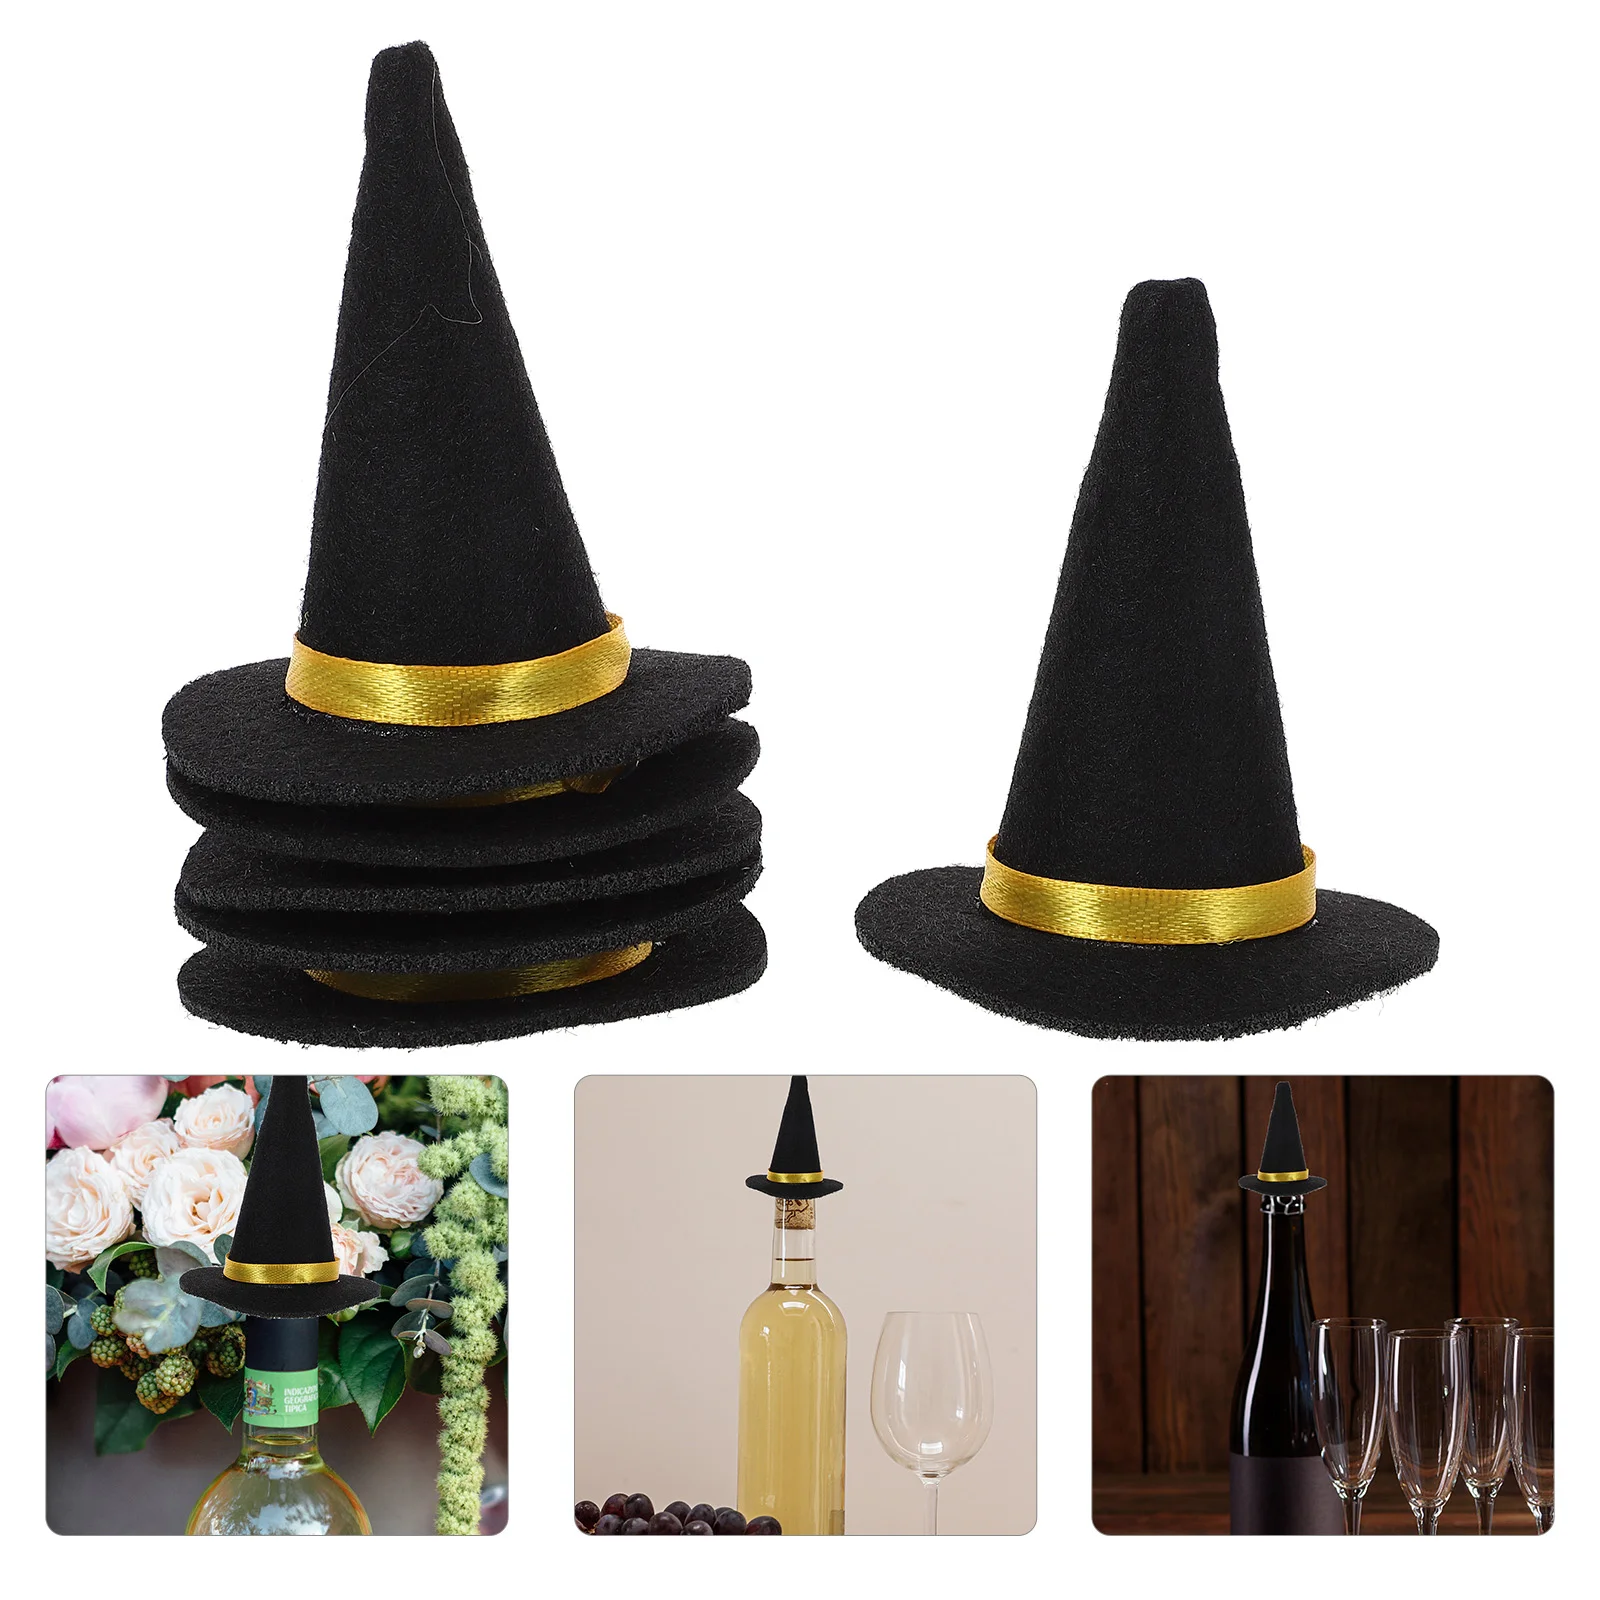 

Halloween Witch Hat Bottle Hats mini Decor Cover Small Sombrero Covers Party Doll For Miniature Cap Felt Table Decorations